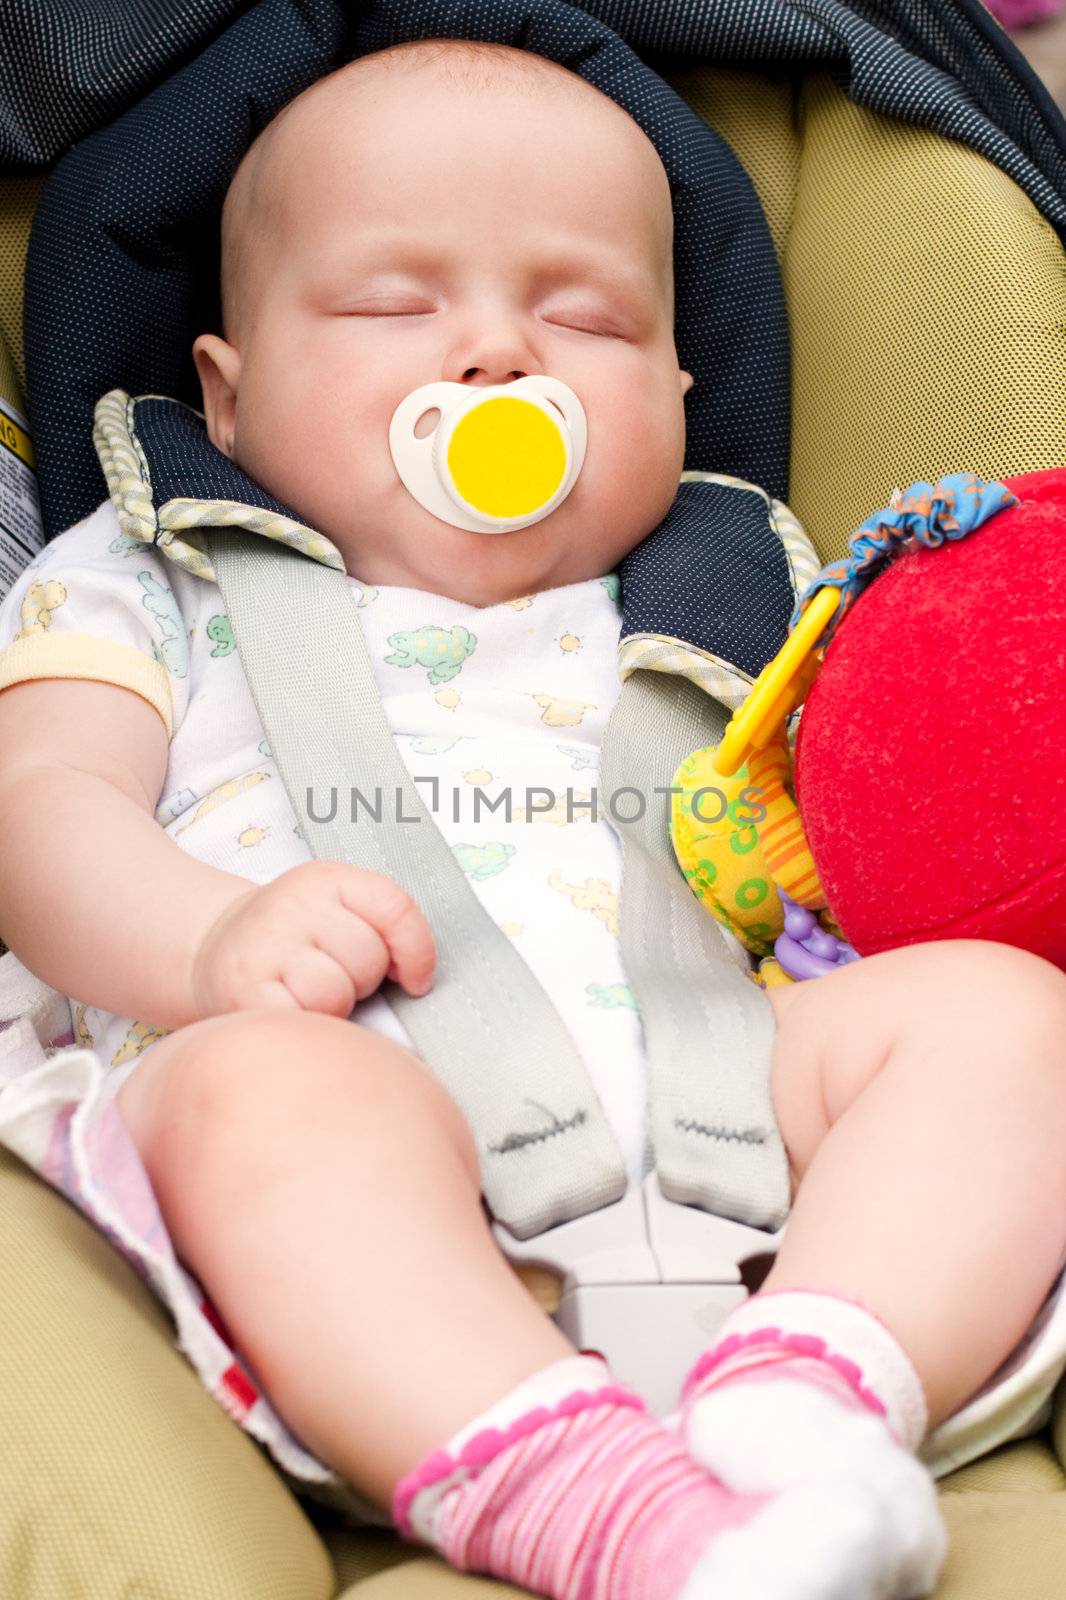 Four month infant sleeping in a car seat